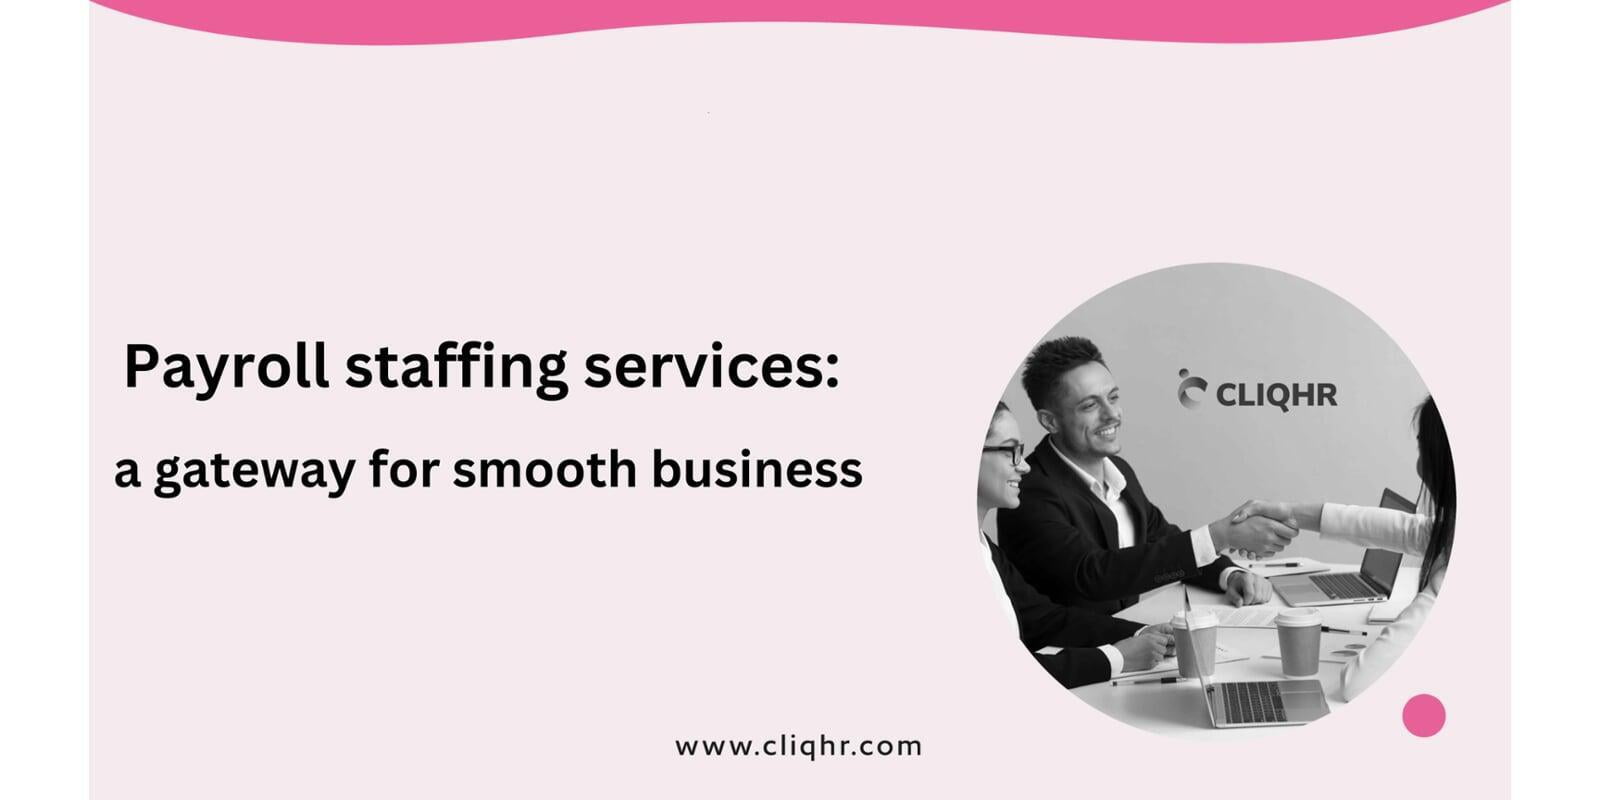 Payroll staffing services: A gateway for smooth business